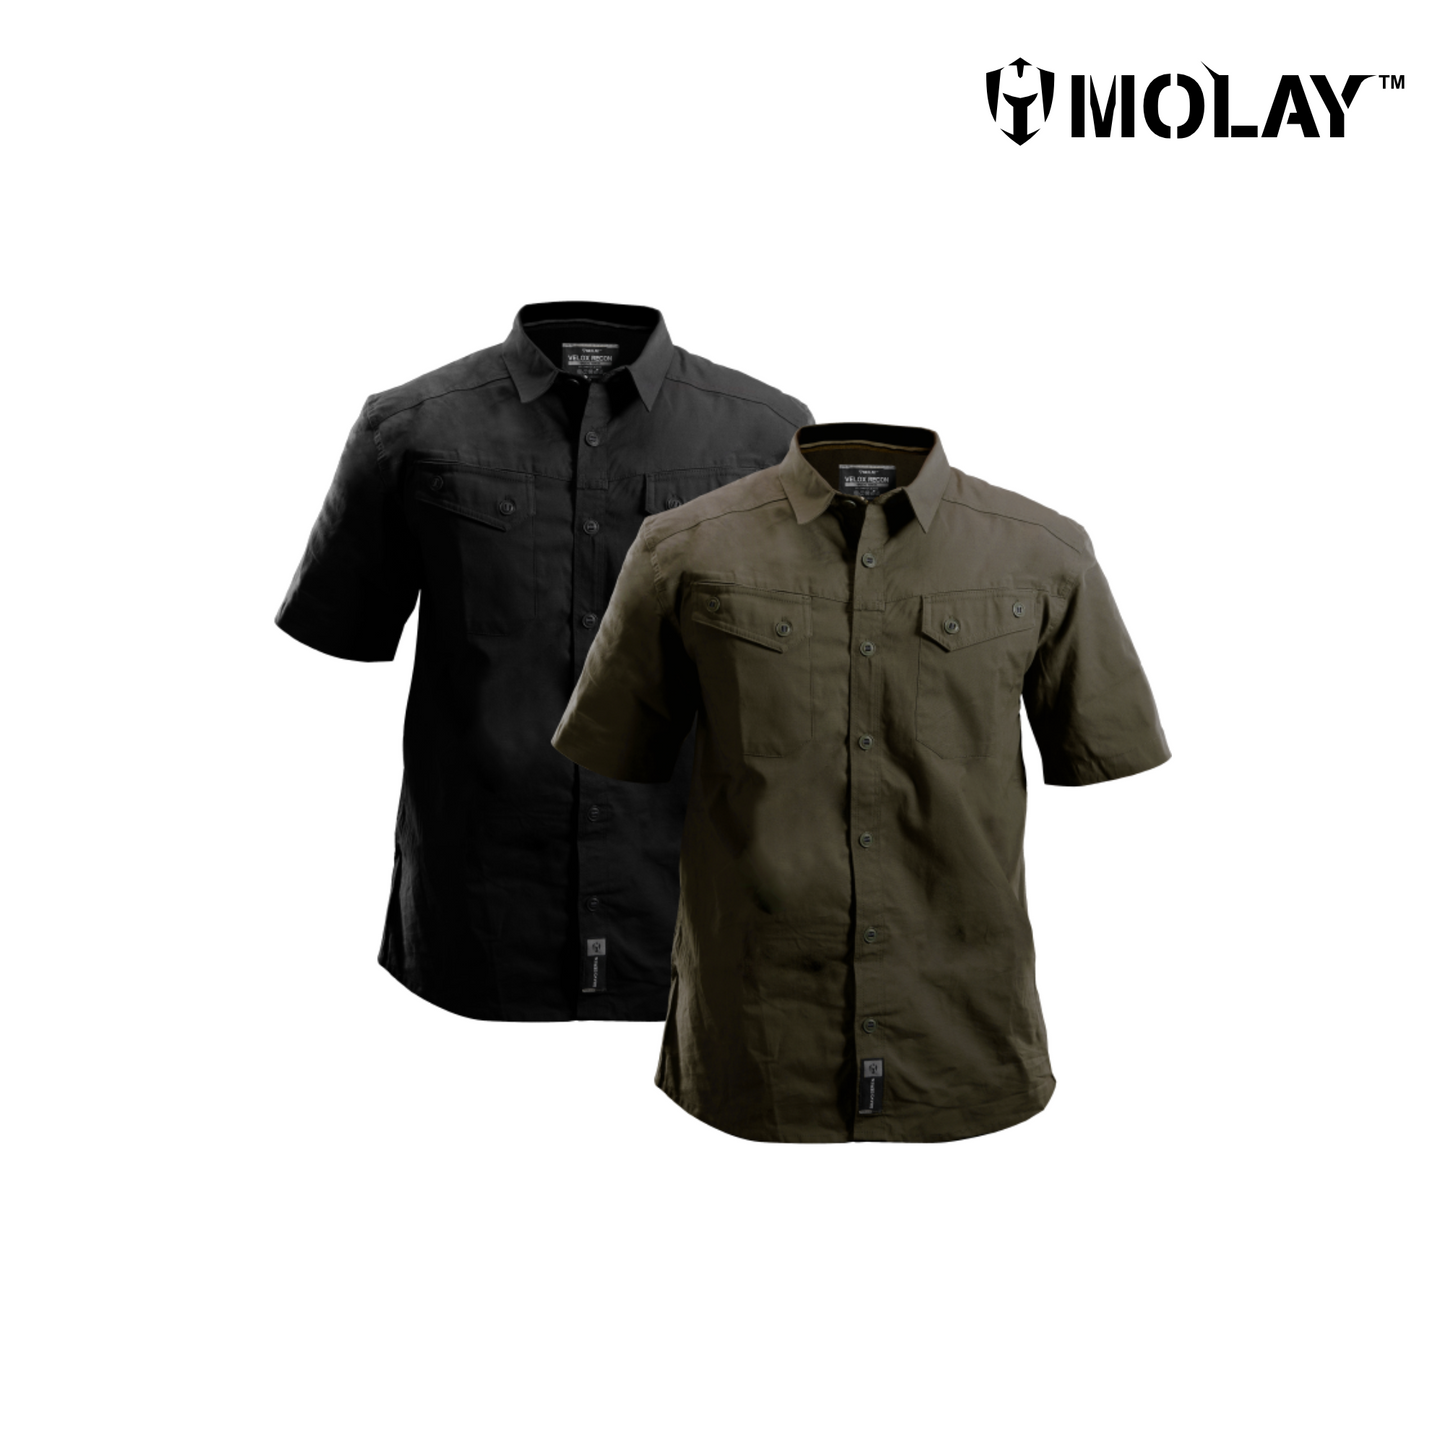 Molay™️ Velox Recon Shirt Twill Polyester Edition - Short Sleeve